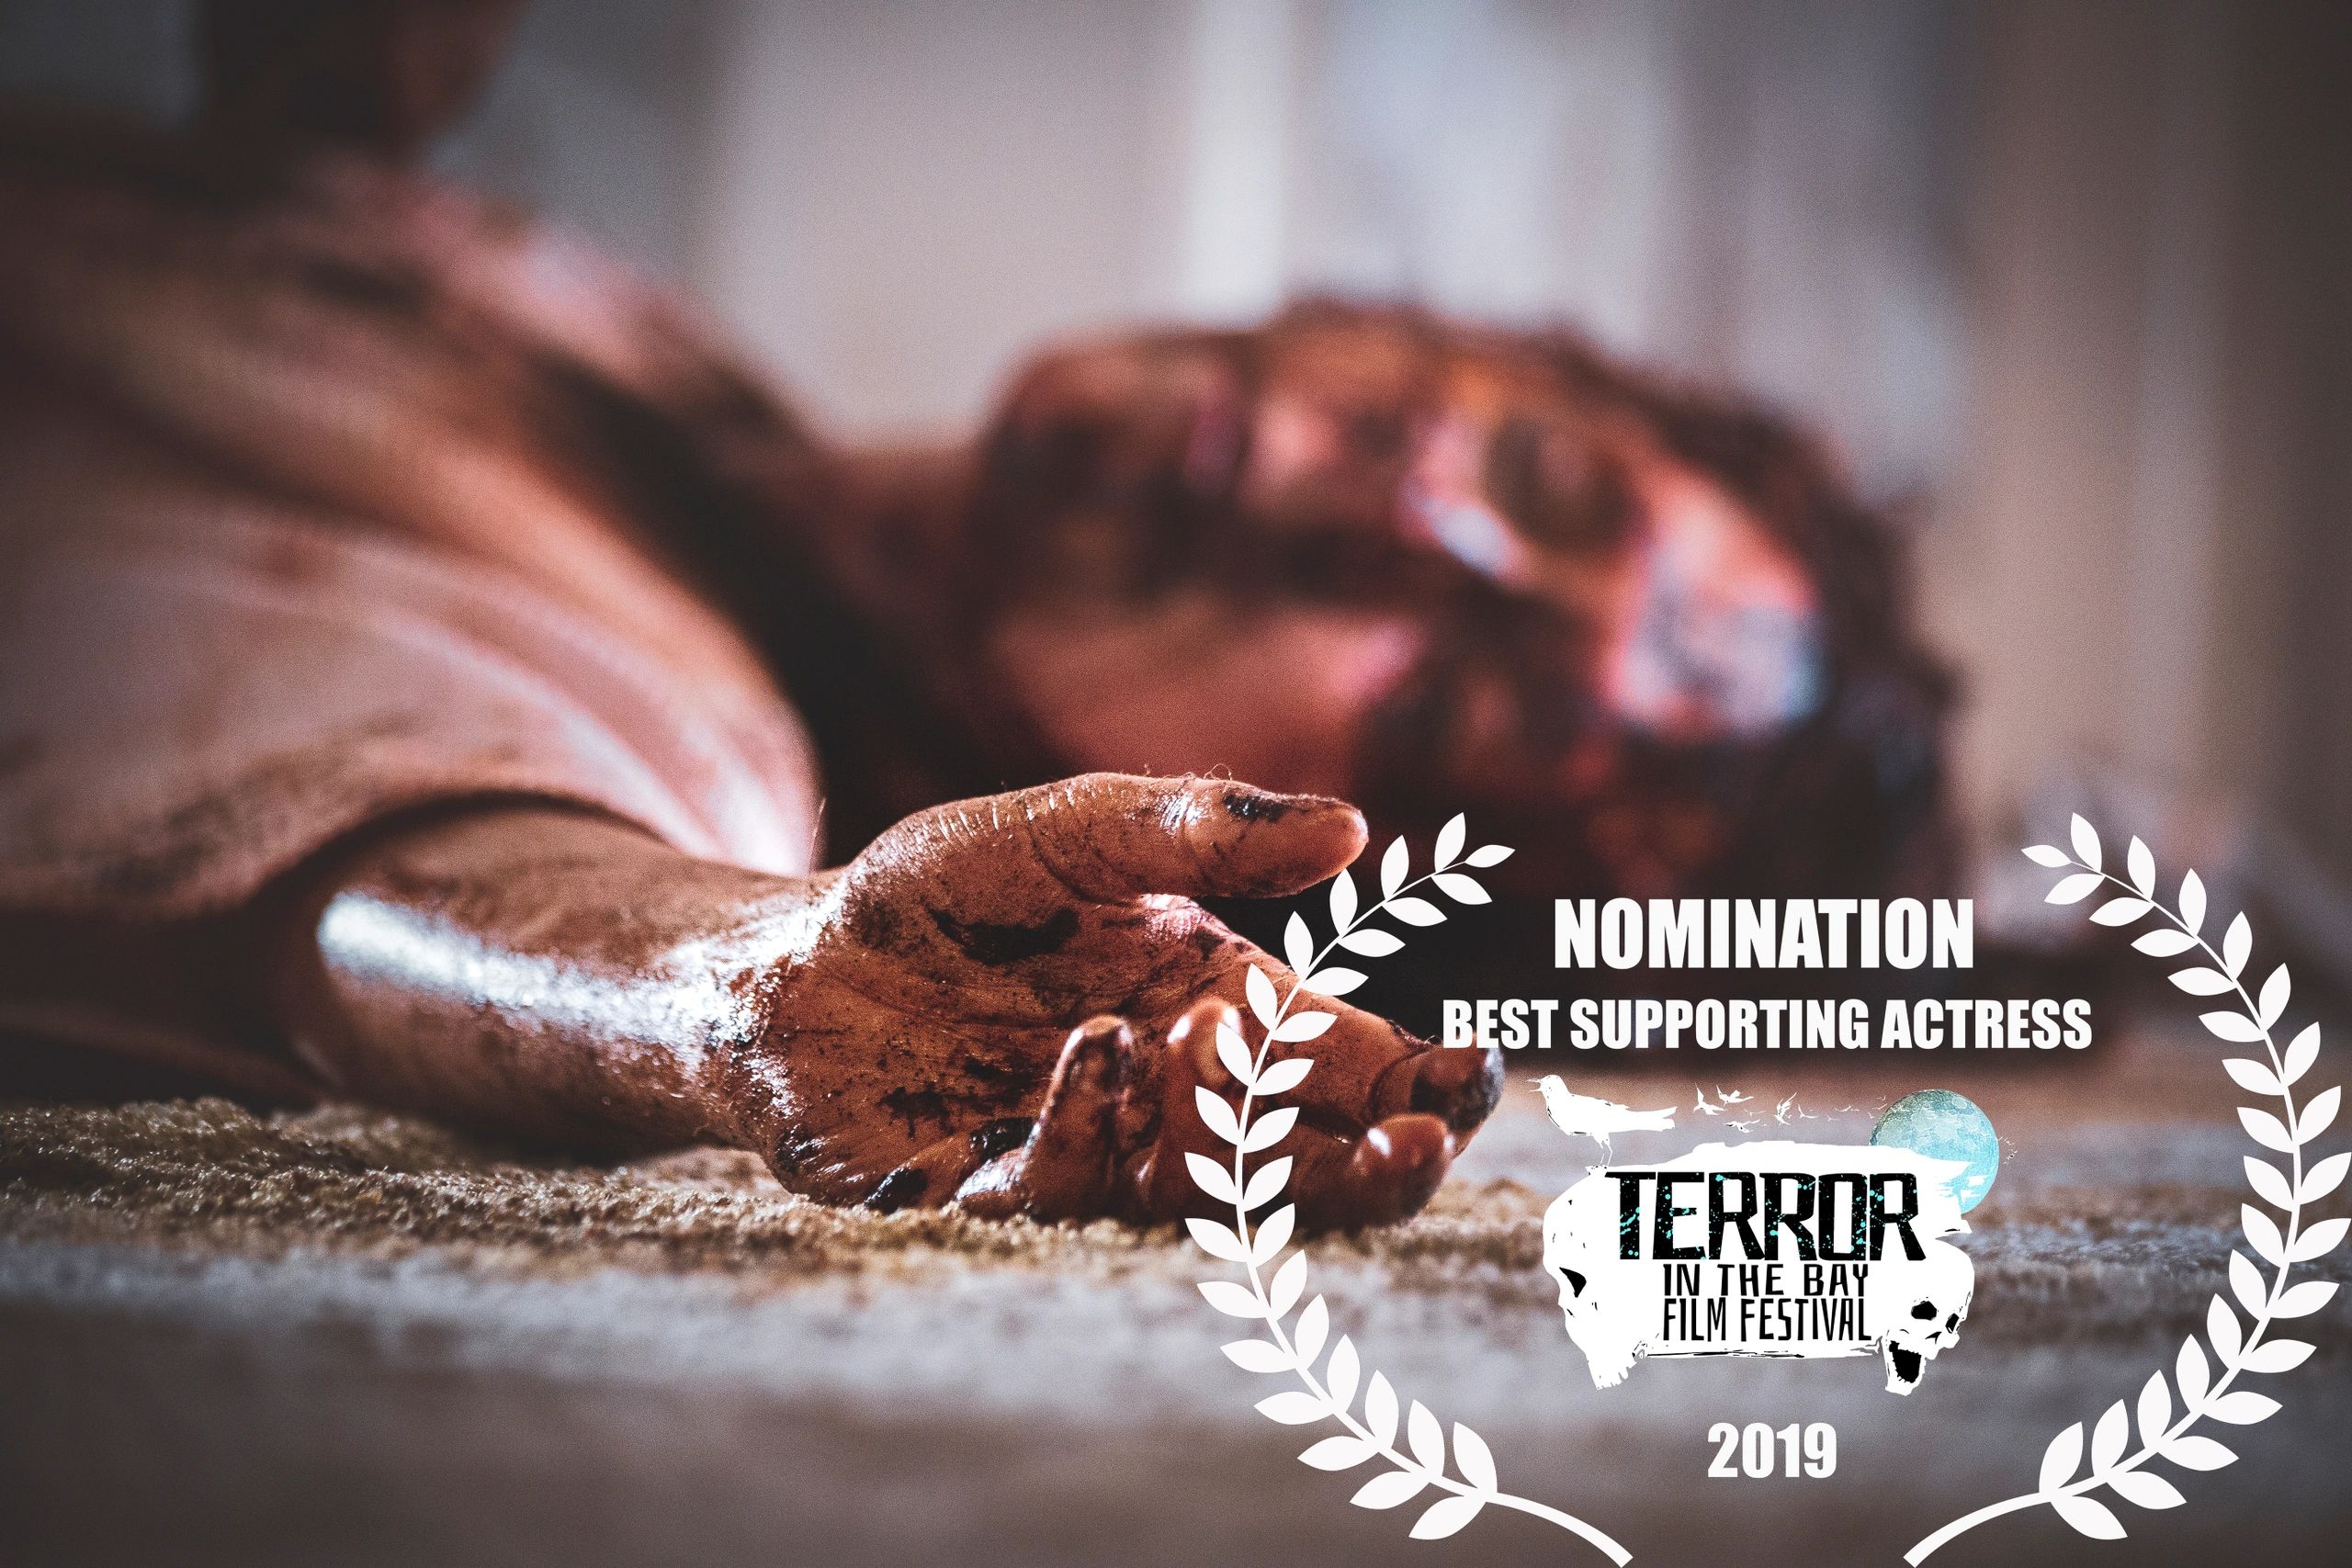 Katrina Mathers in "Maggie May" Nomination Best Supporting Actress "Terror in the Bay Film Festival"